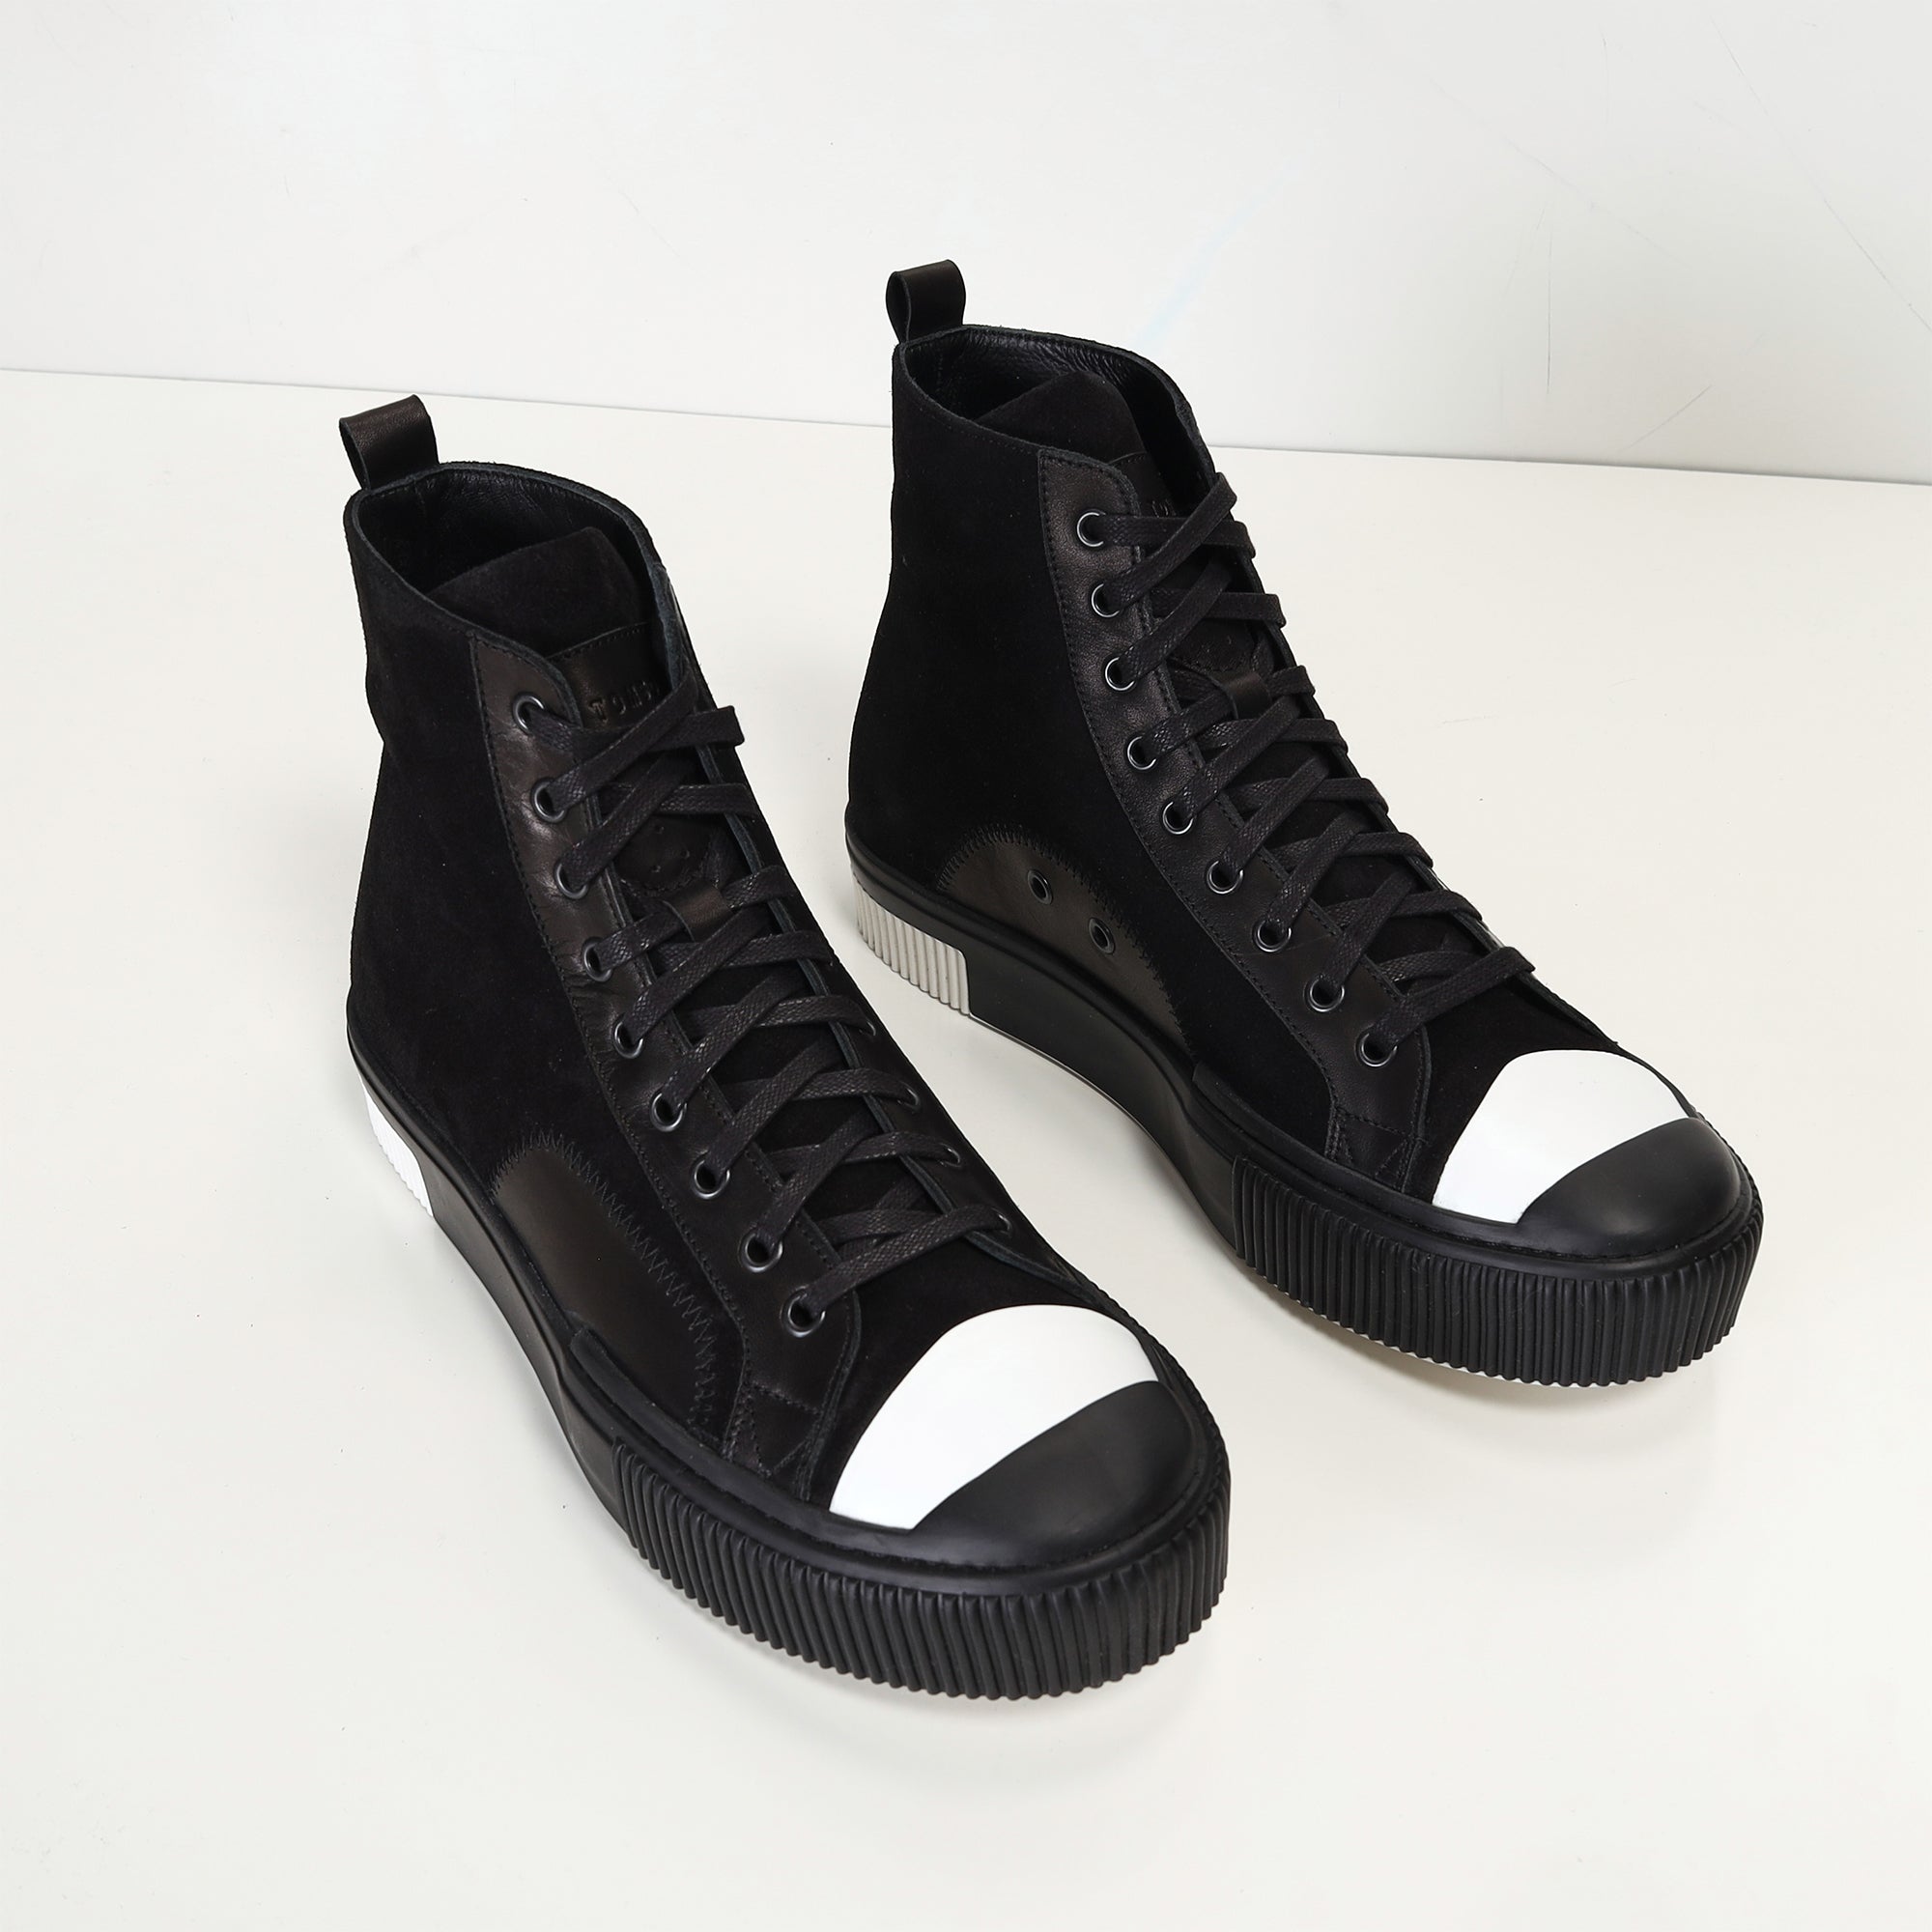 The King Leather and Suede High Tops - Black Suede - Ron Tomson